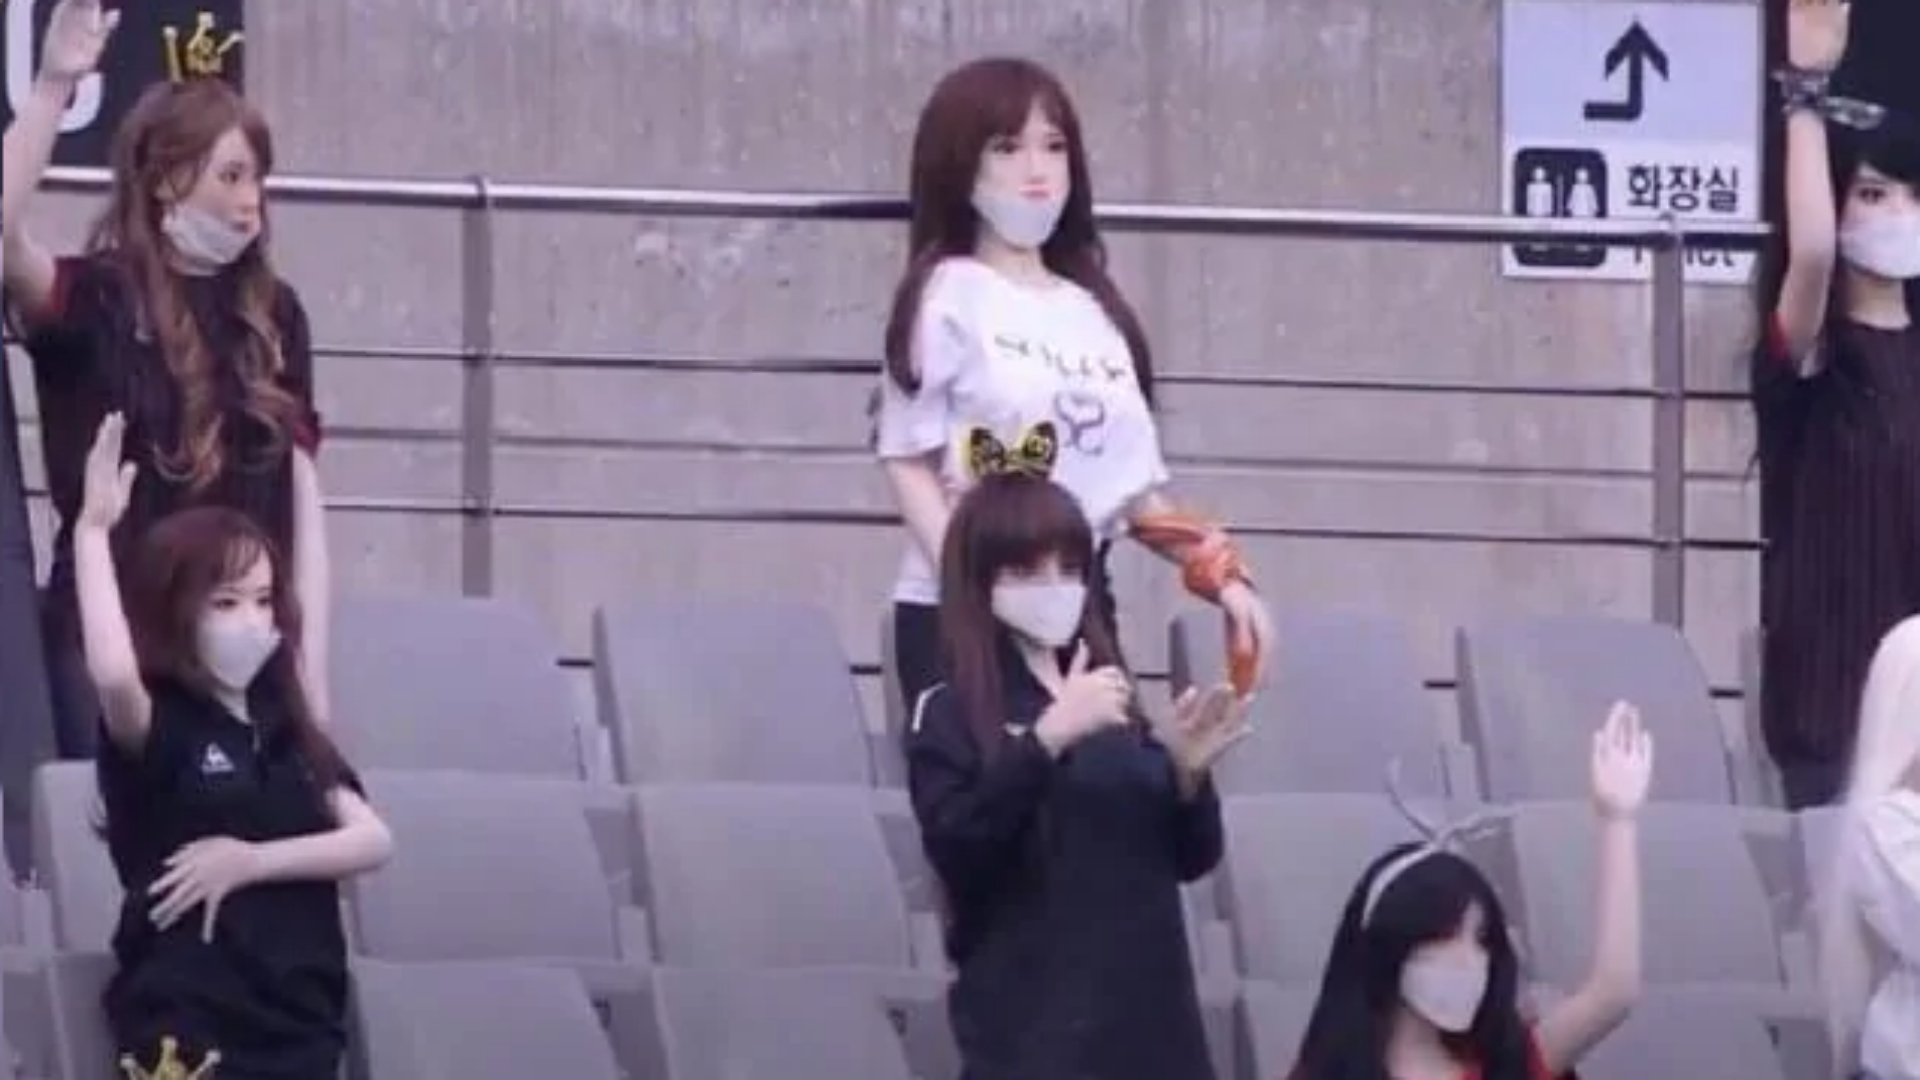 'An inexcusable mistake' - K-League club FC Seoul apologises after filling stadium with sex dolls